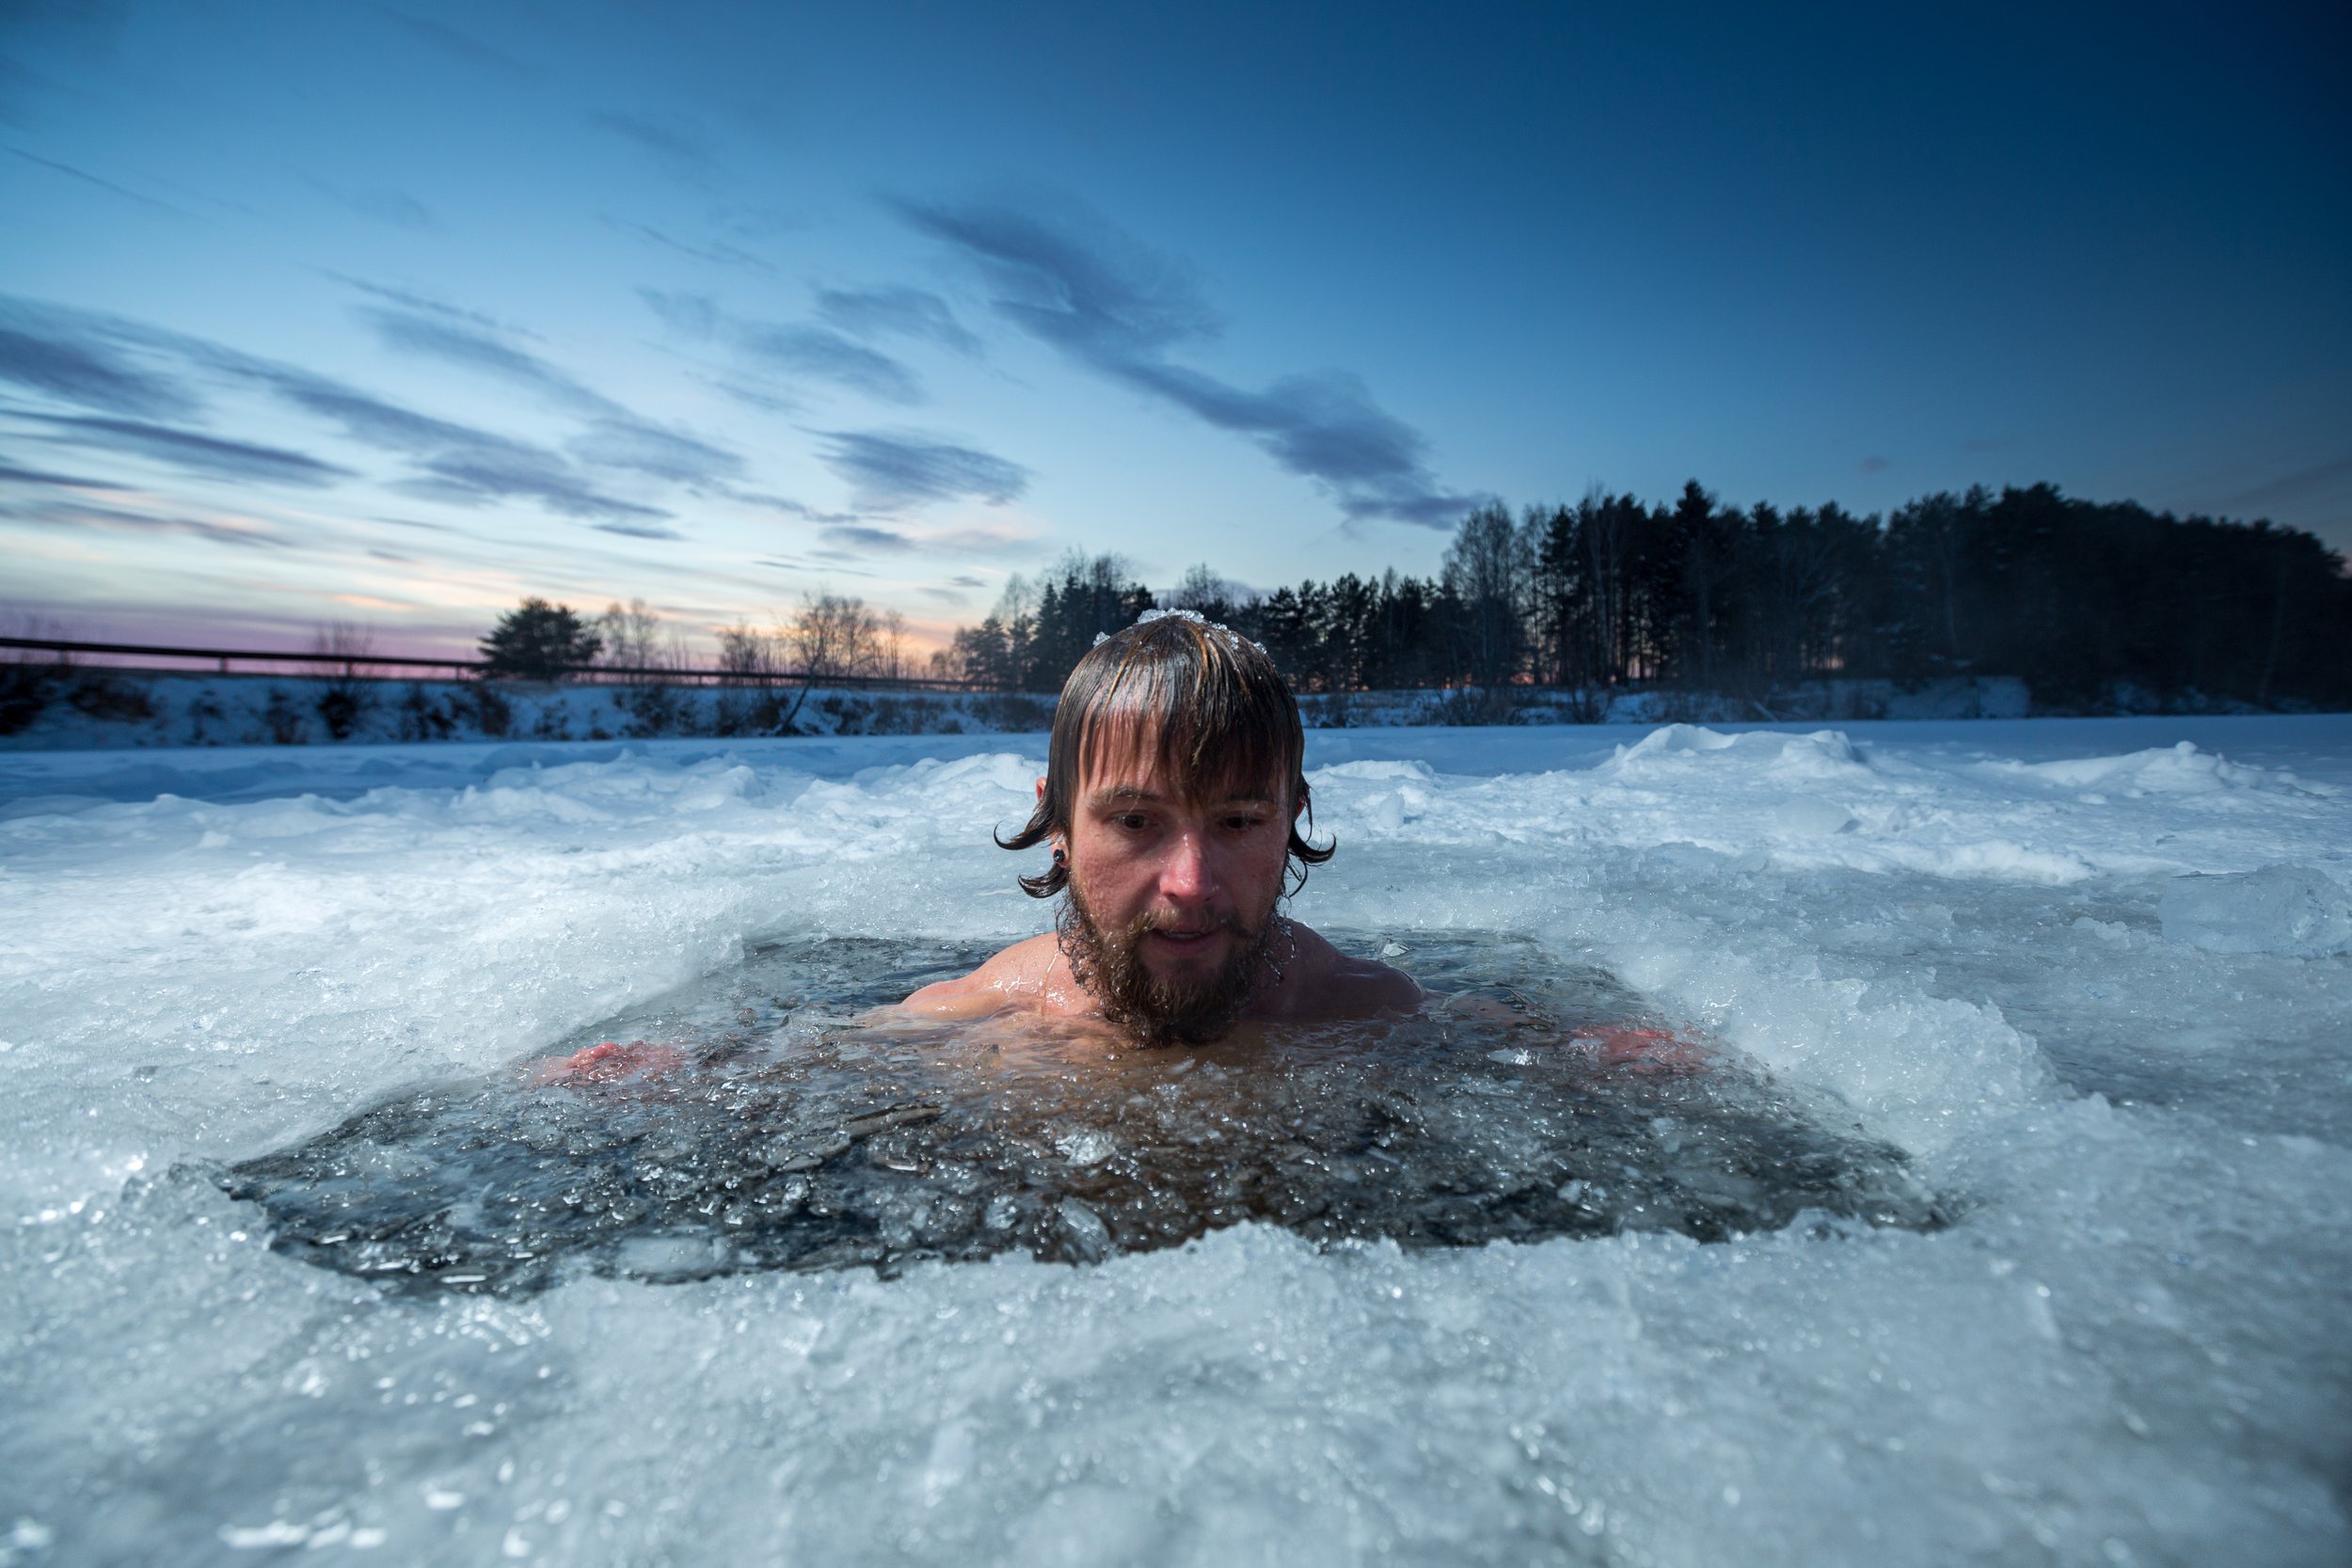 How To Do A Cold Plunge The Wim Hof Way — Midwest BioHealth-Dr. John  Jonson, DDS